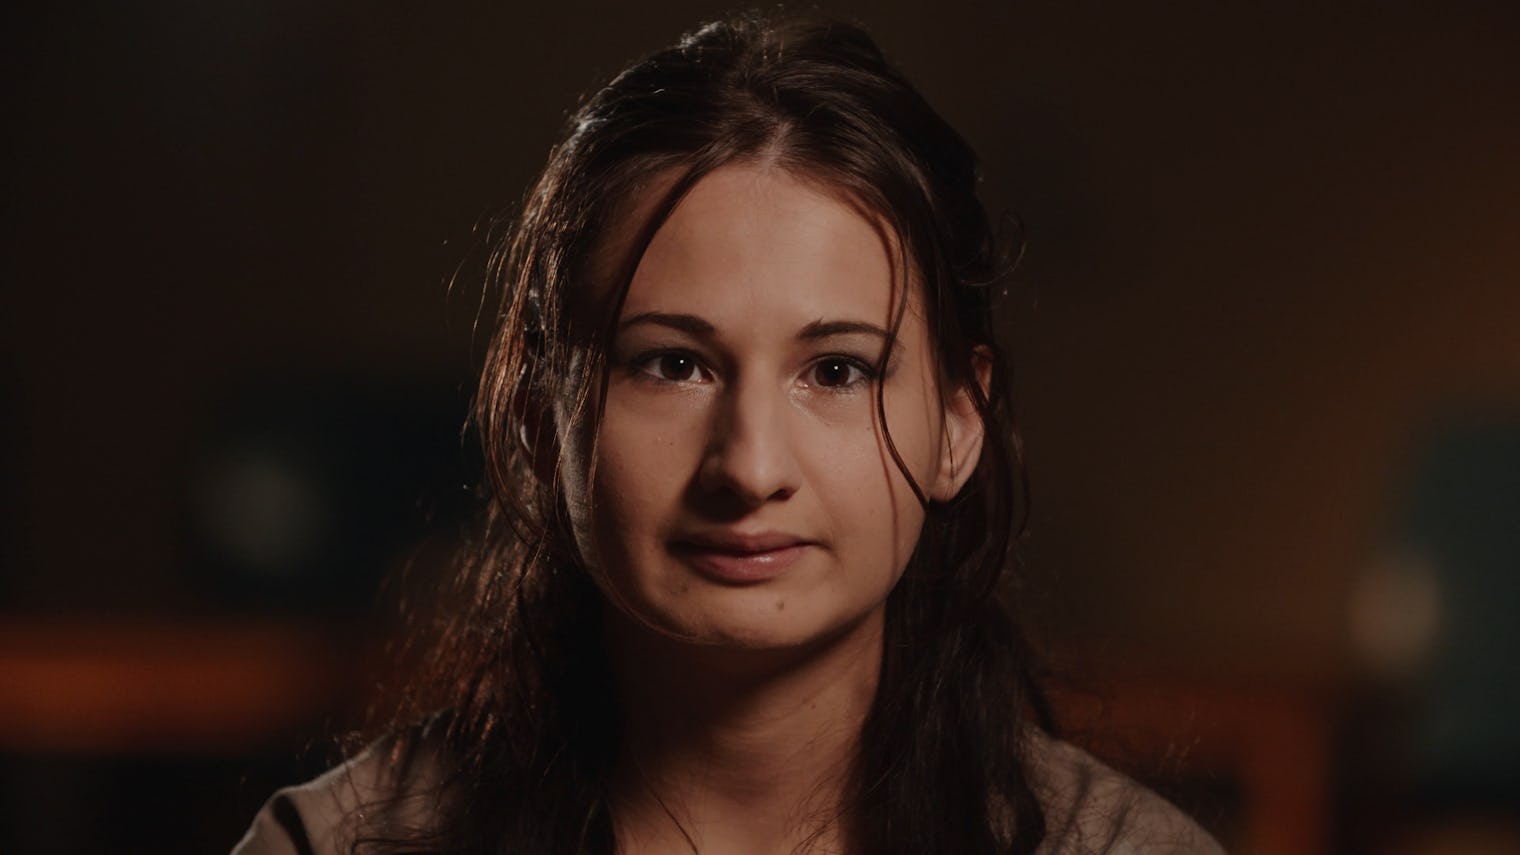 Is Gypsy Rose Blanchard Still In Prison In 2018? She Doesn't Look At